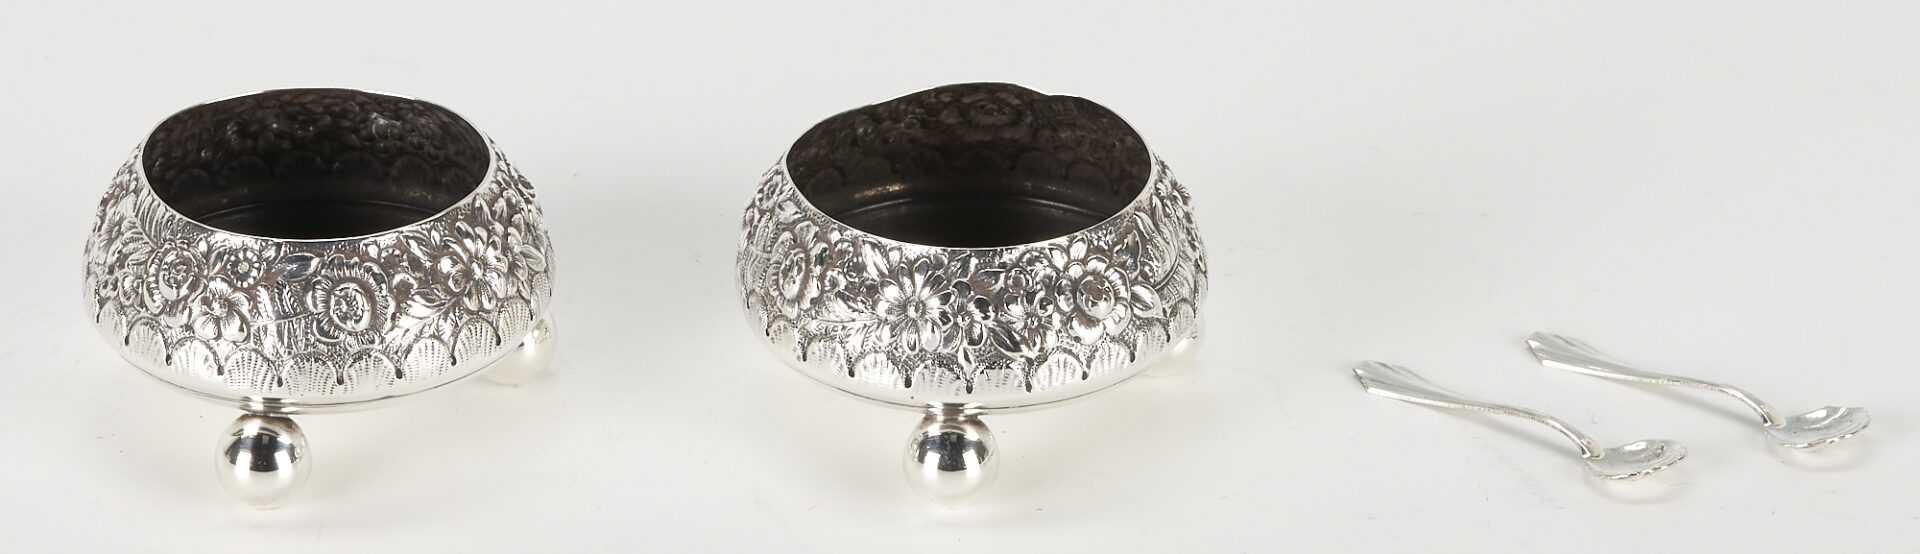 Lot 1109: 8 pcs. Assd. Sterling, Mostly Hollowware, incl. Tiffany & Co.